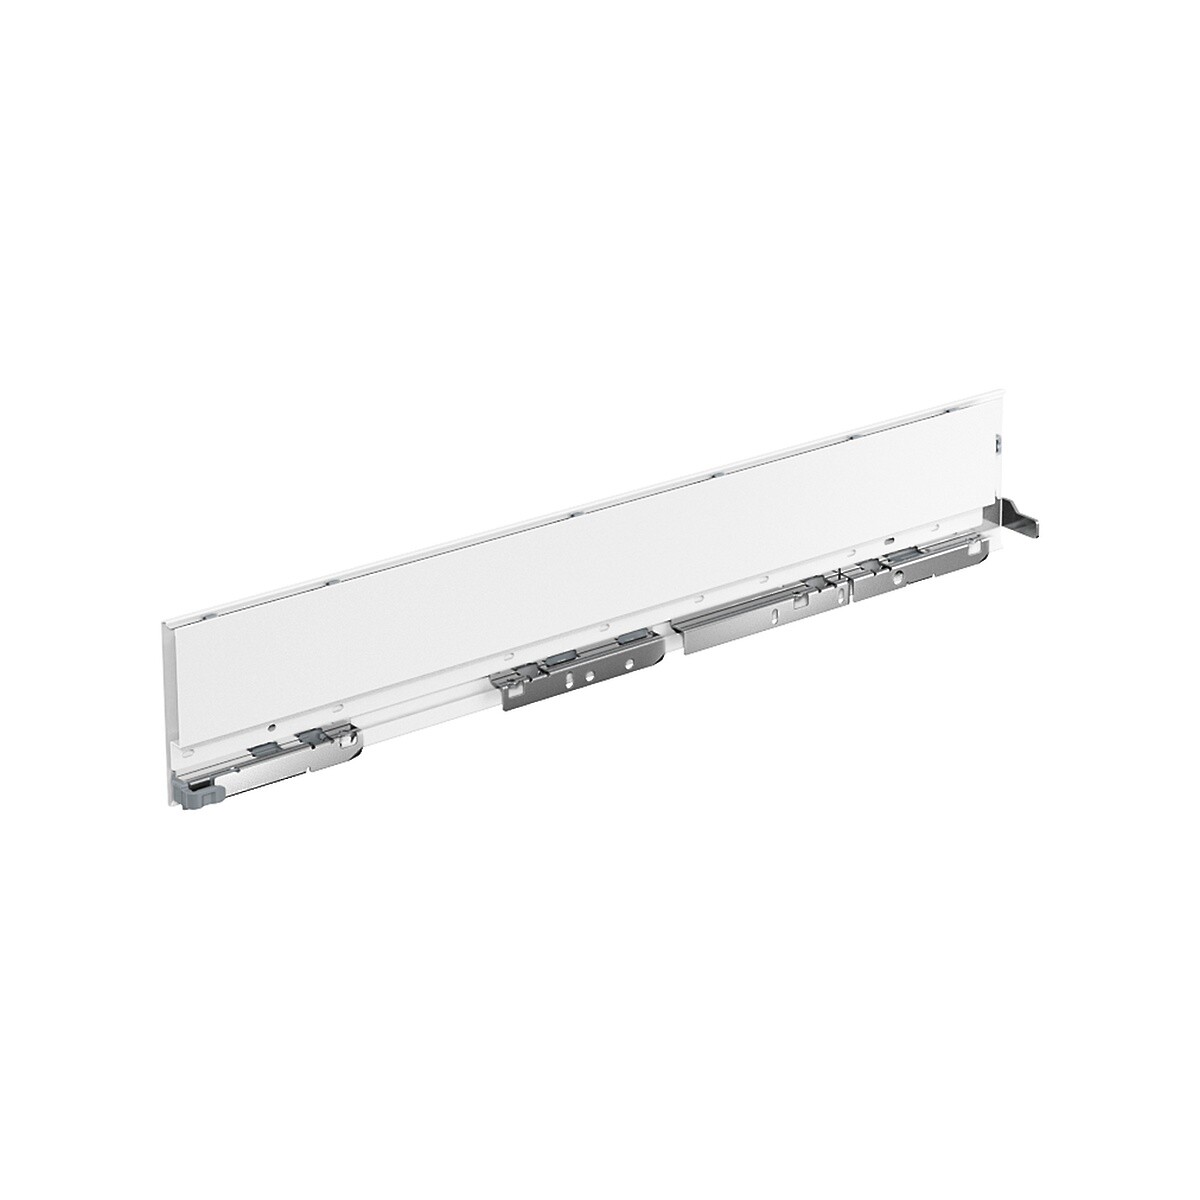 AvanTech YOU Drawer side profile, height 101 mm x NL 450 mm, White, Right